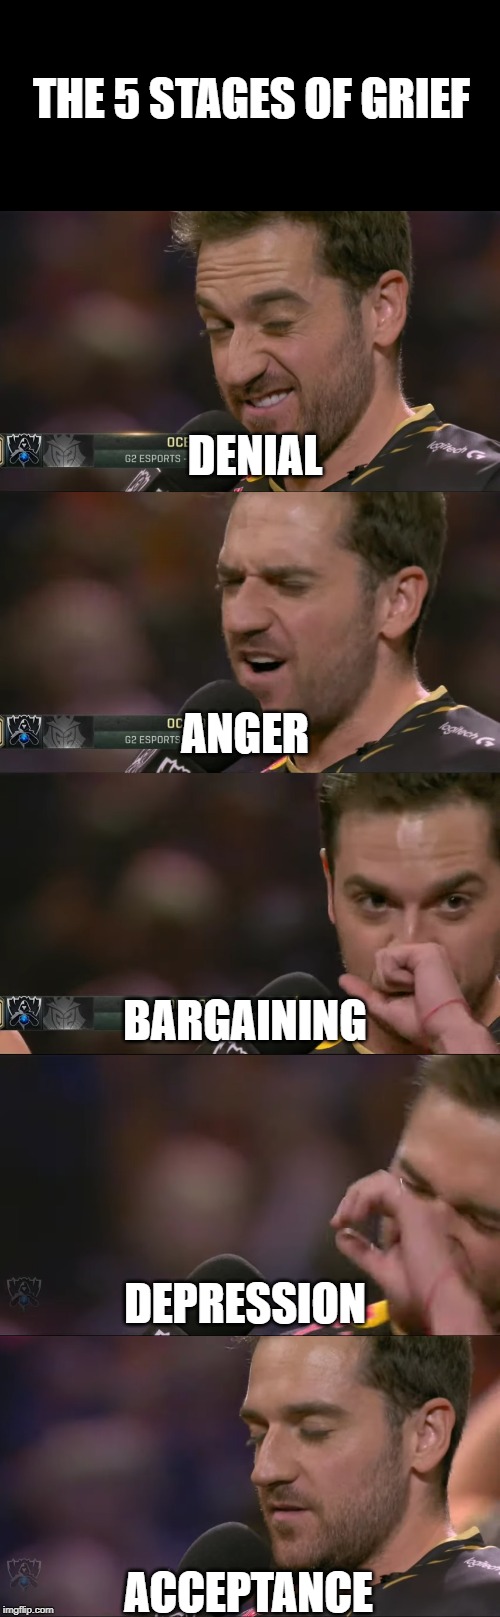 The 5 stages of grief by Ocelote | THE 5 STAGES OF GRIEF; DENIAL; ANGER; BARGAINING; DEPRESSION; ACCEPTANCE | image tagged in ocelote,worlds 2019,g2 esports,g2,the 5 stages of grief,denial | made w/ Imgflip meme maker